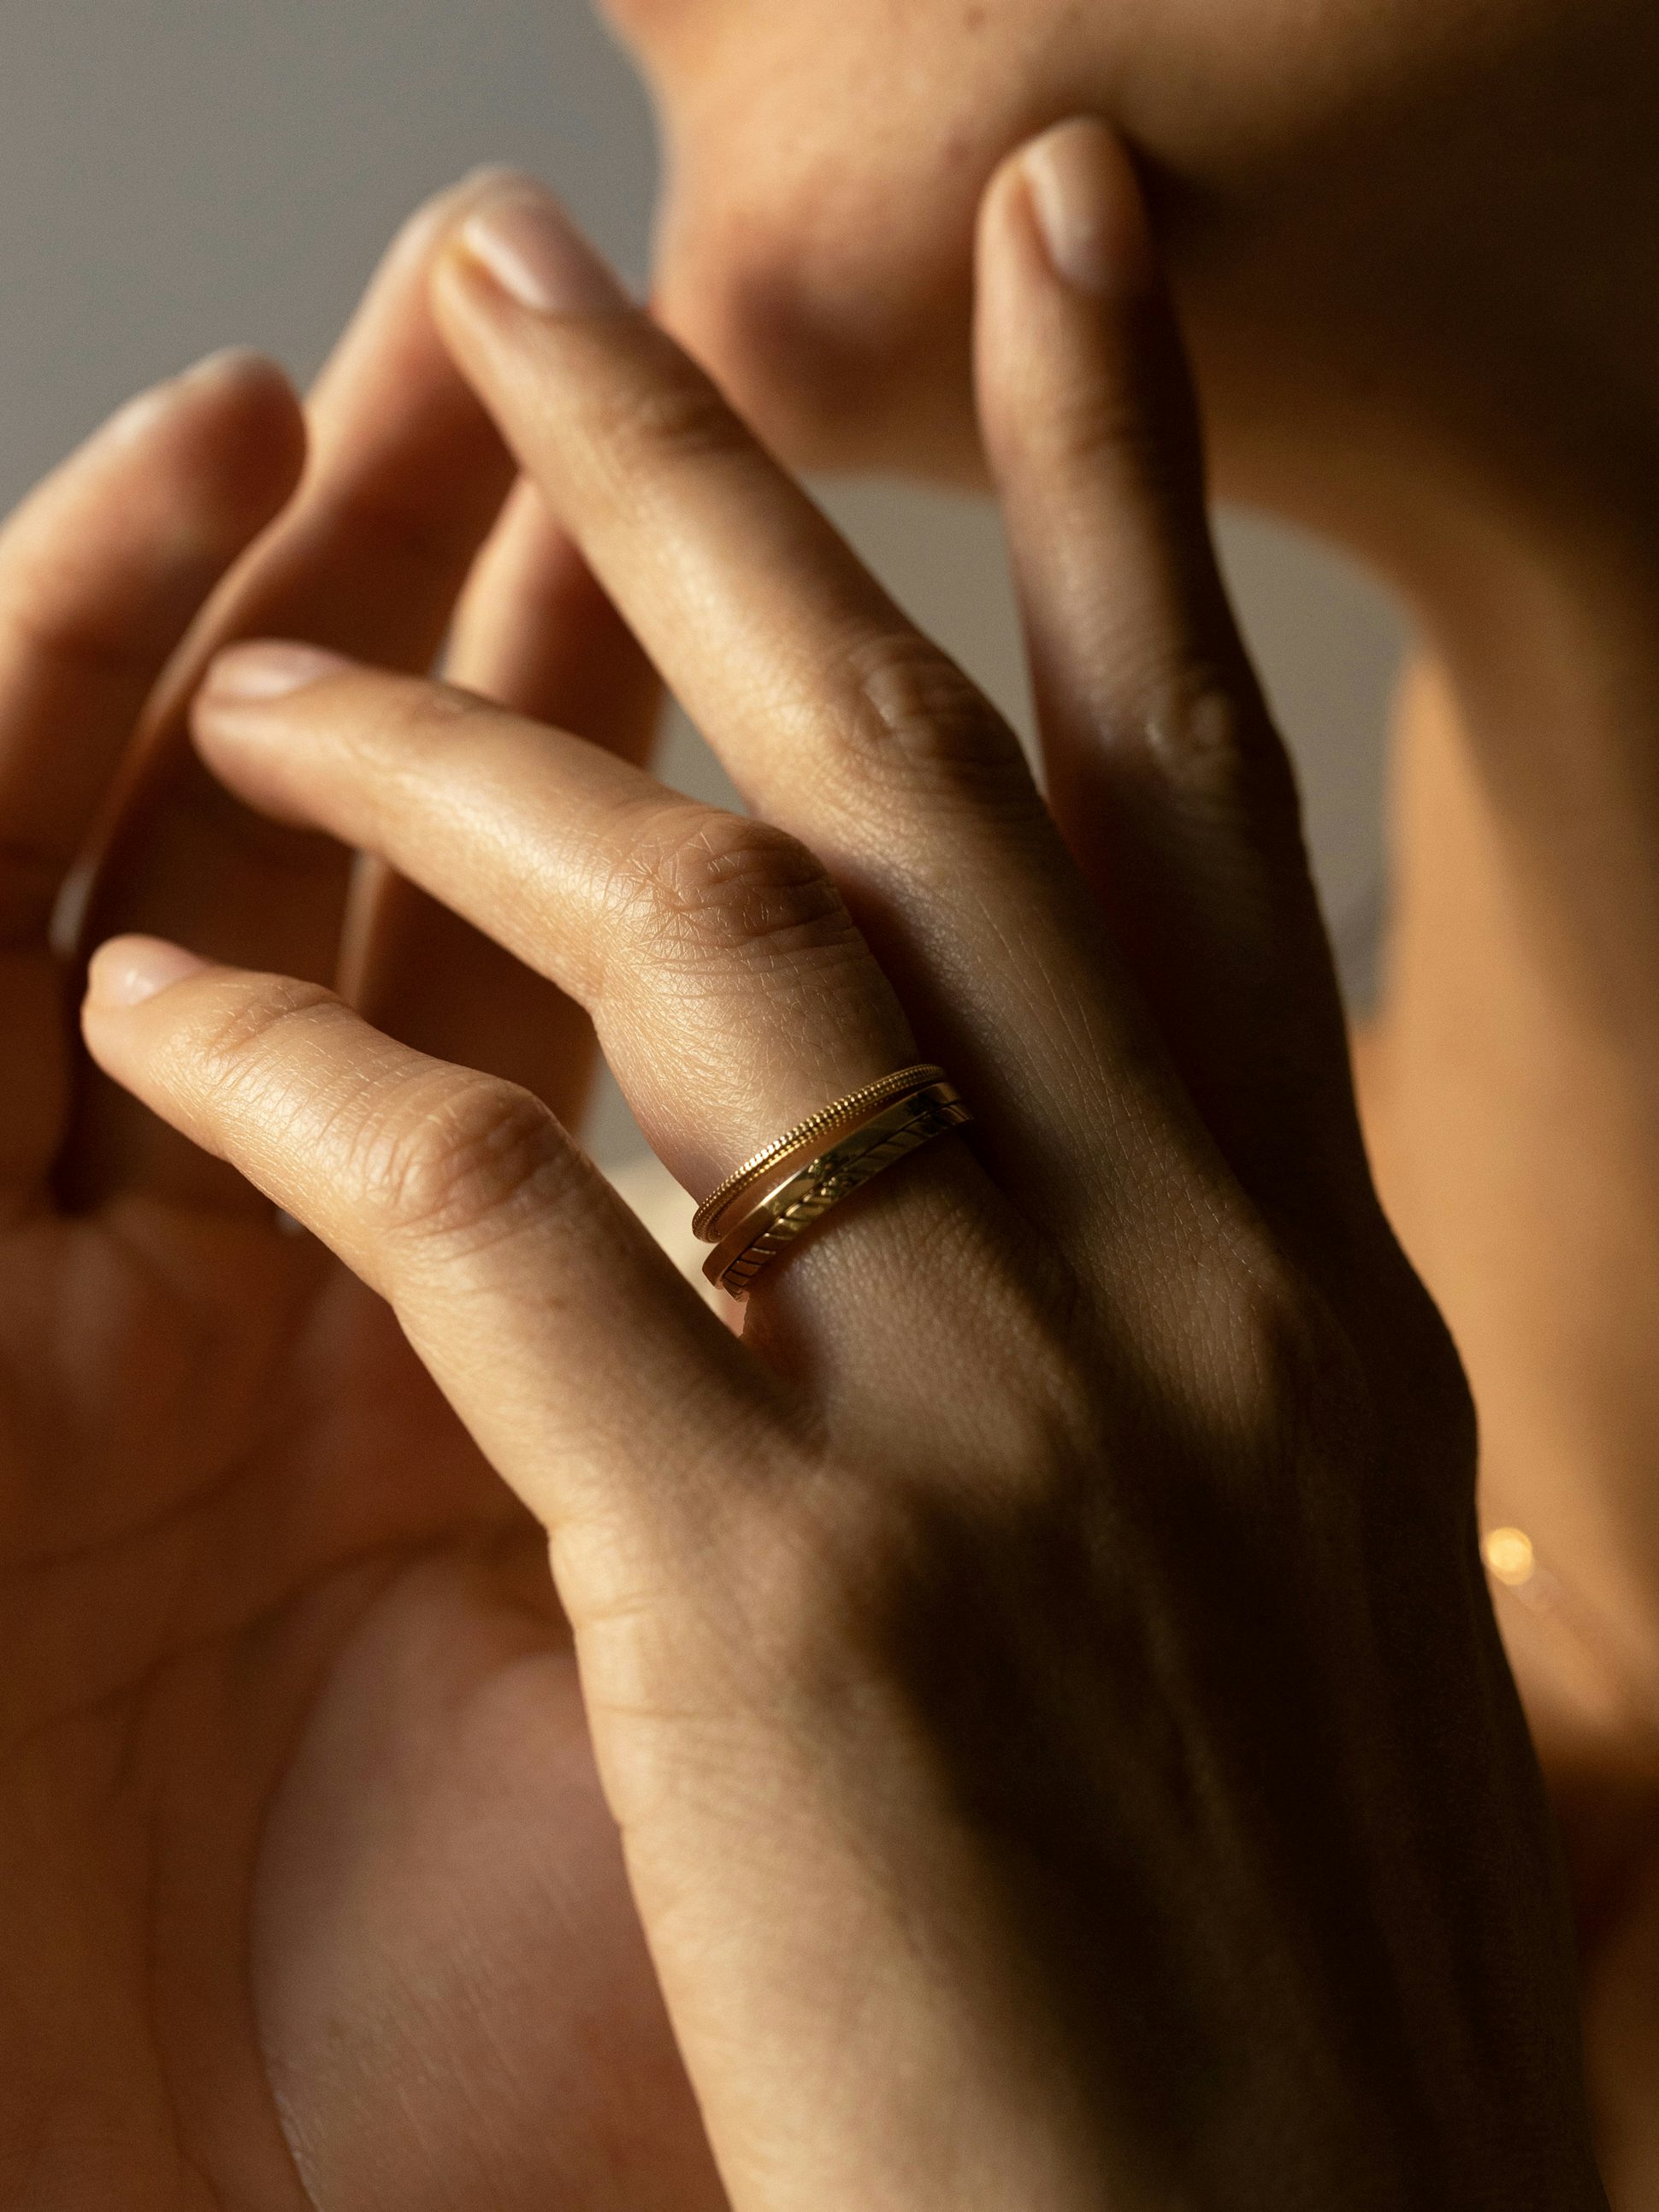 Anagramme grooved ring in 18k Fairmined ethical yellow gold | JEM Jewellery Ethically Minded